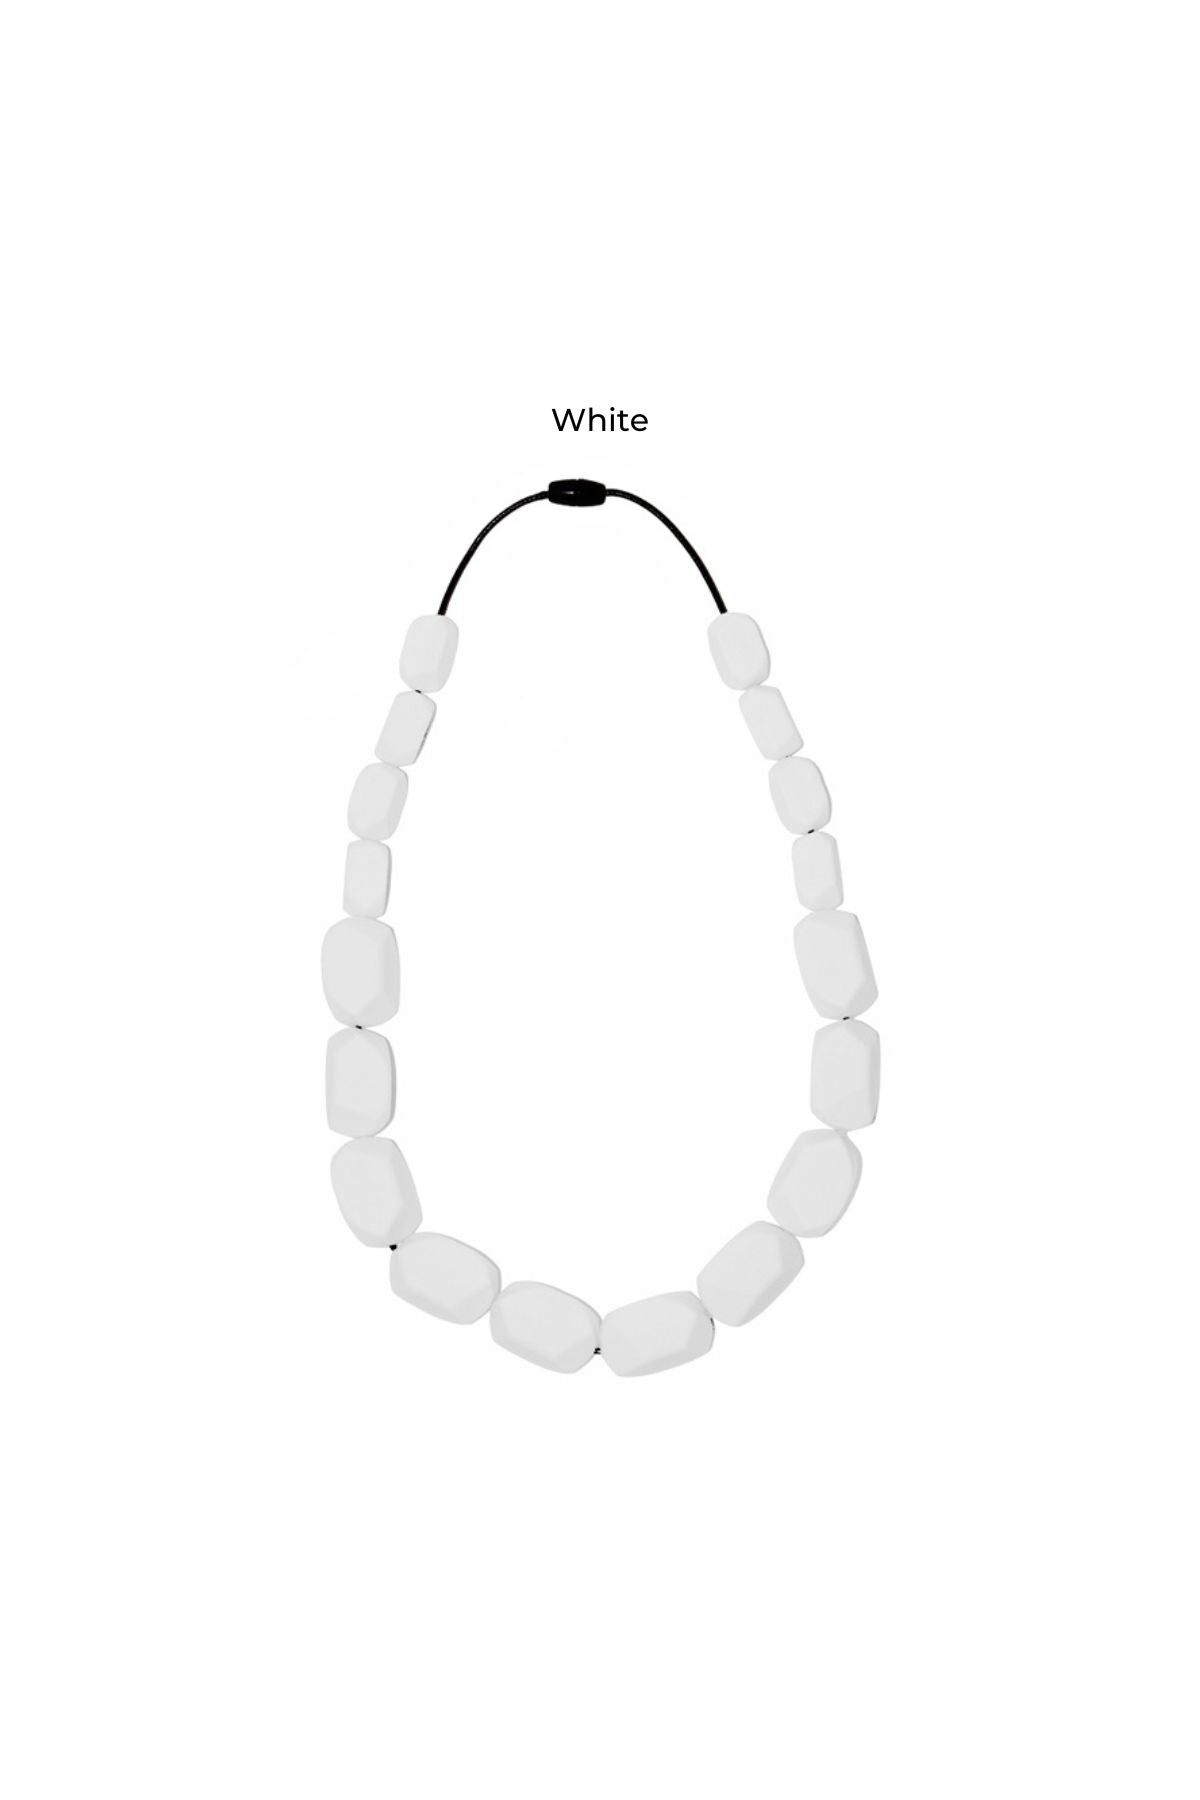 Wilma Rocks Silicone Teething Necklace in White